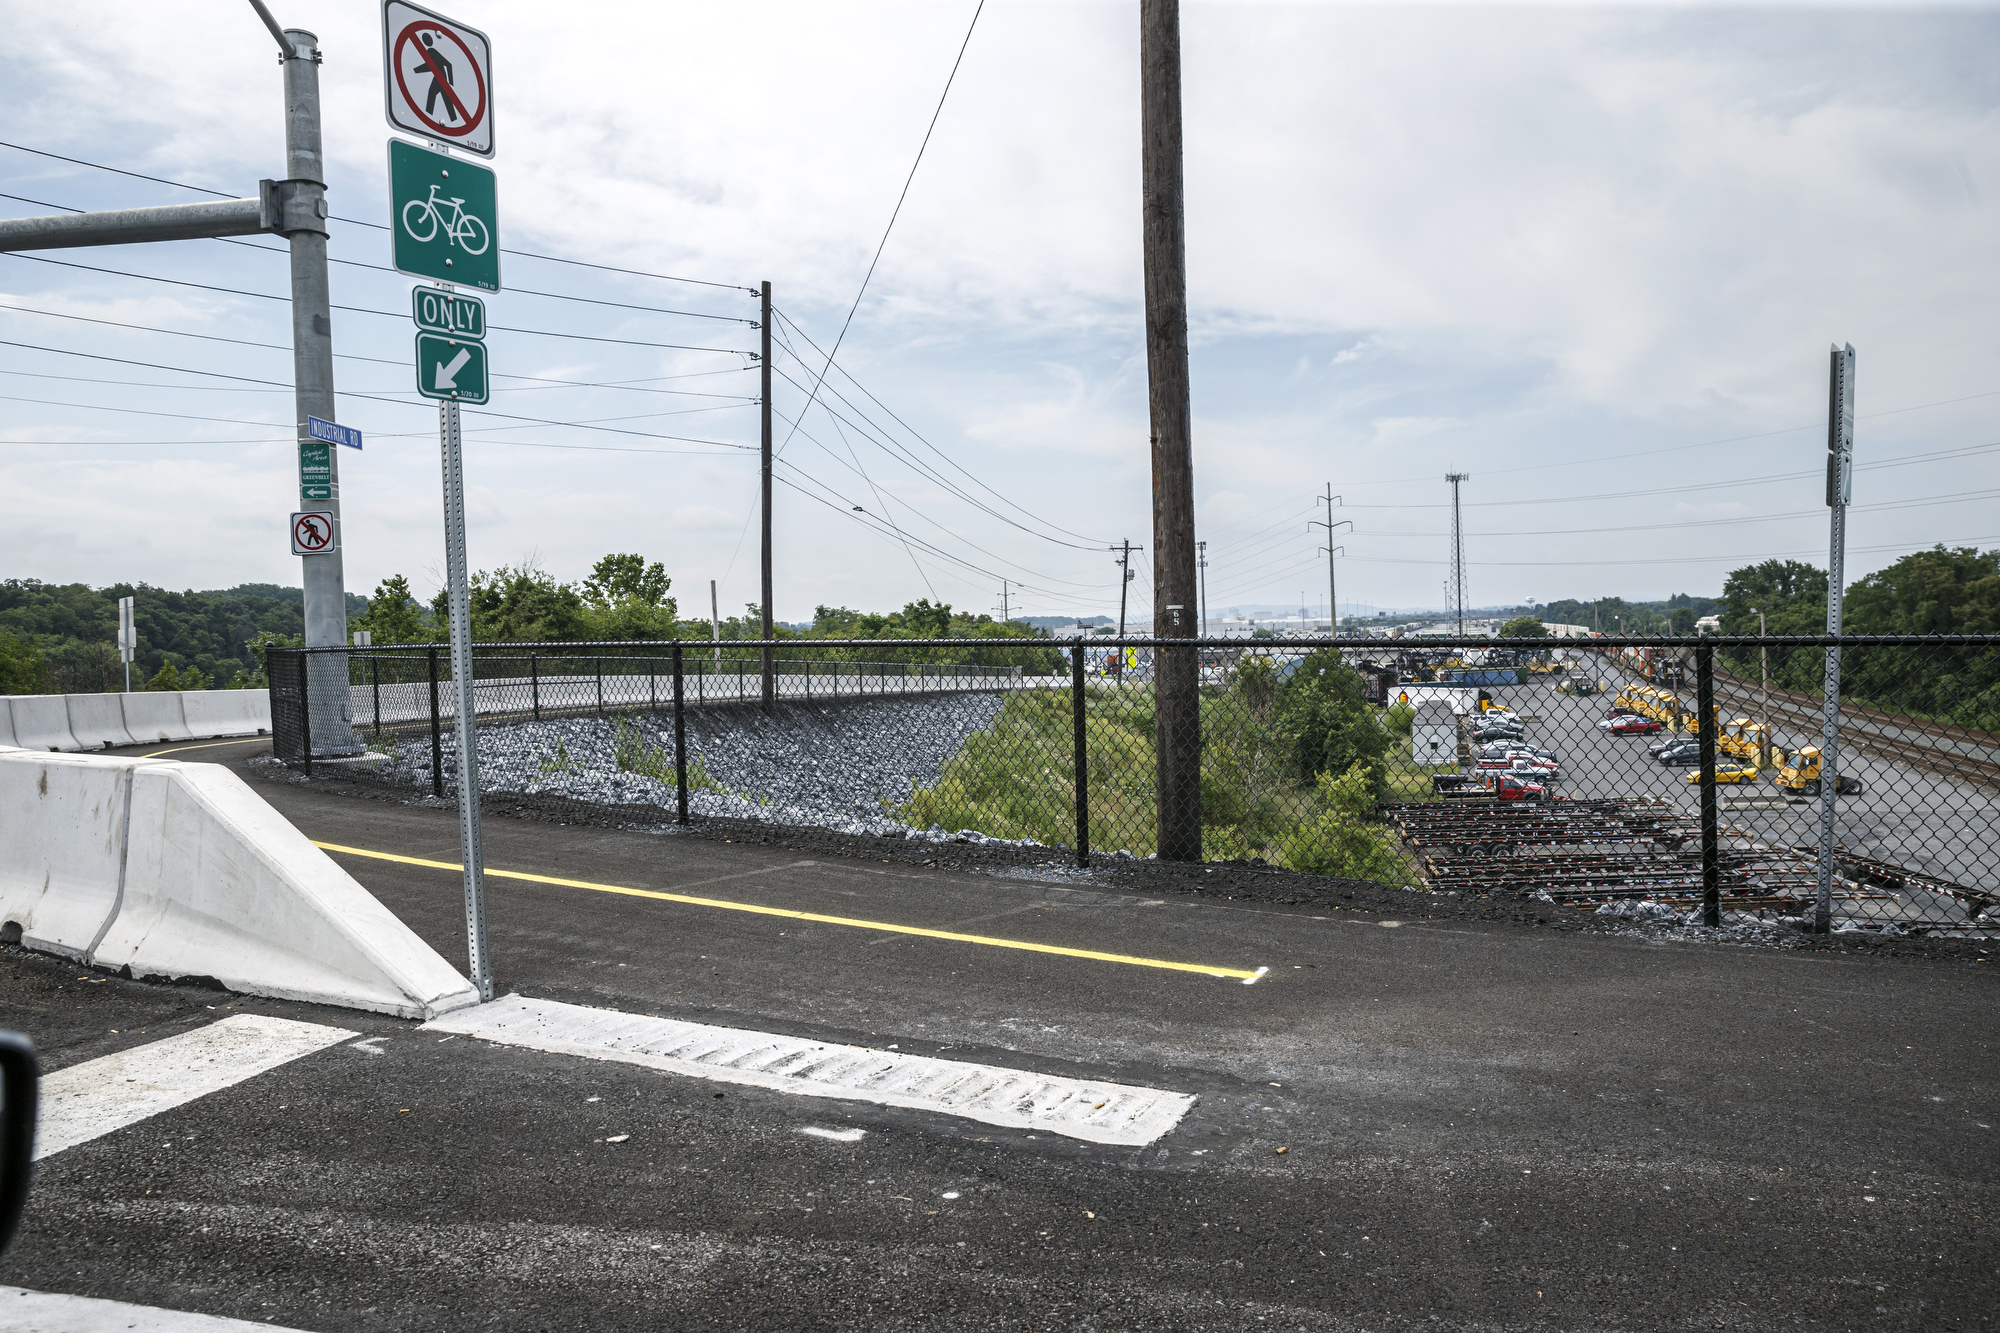 This is the Greenbelt trail extension at the intersection of Industrial Road and Linglestown Road, near Wildwood Park. The Capital Area Greenbelt Fort Hunter 2-mile connector has been finished. The extension connects the 20-mile Greenbelt between Fort Hunter Park and the northernmost part of the Greenbelt at Lingletstown Road at Wildwood Park.July 17, 2020. Dan Gleiter | dgleiter@pennlive.com